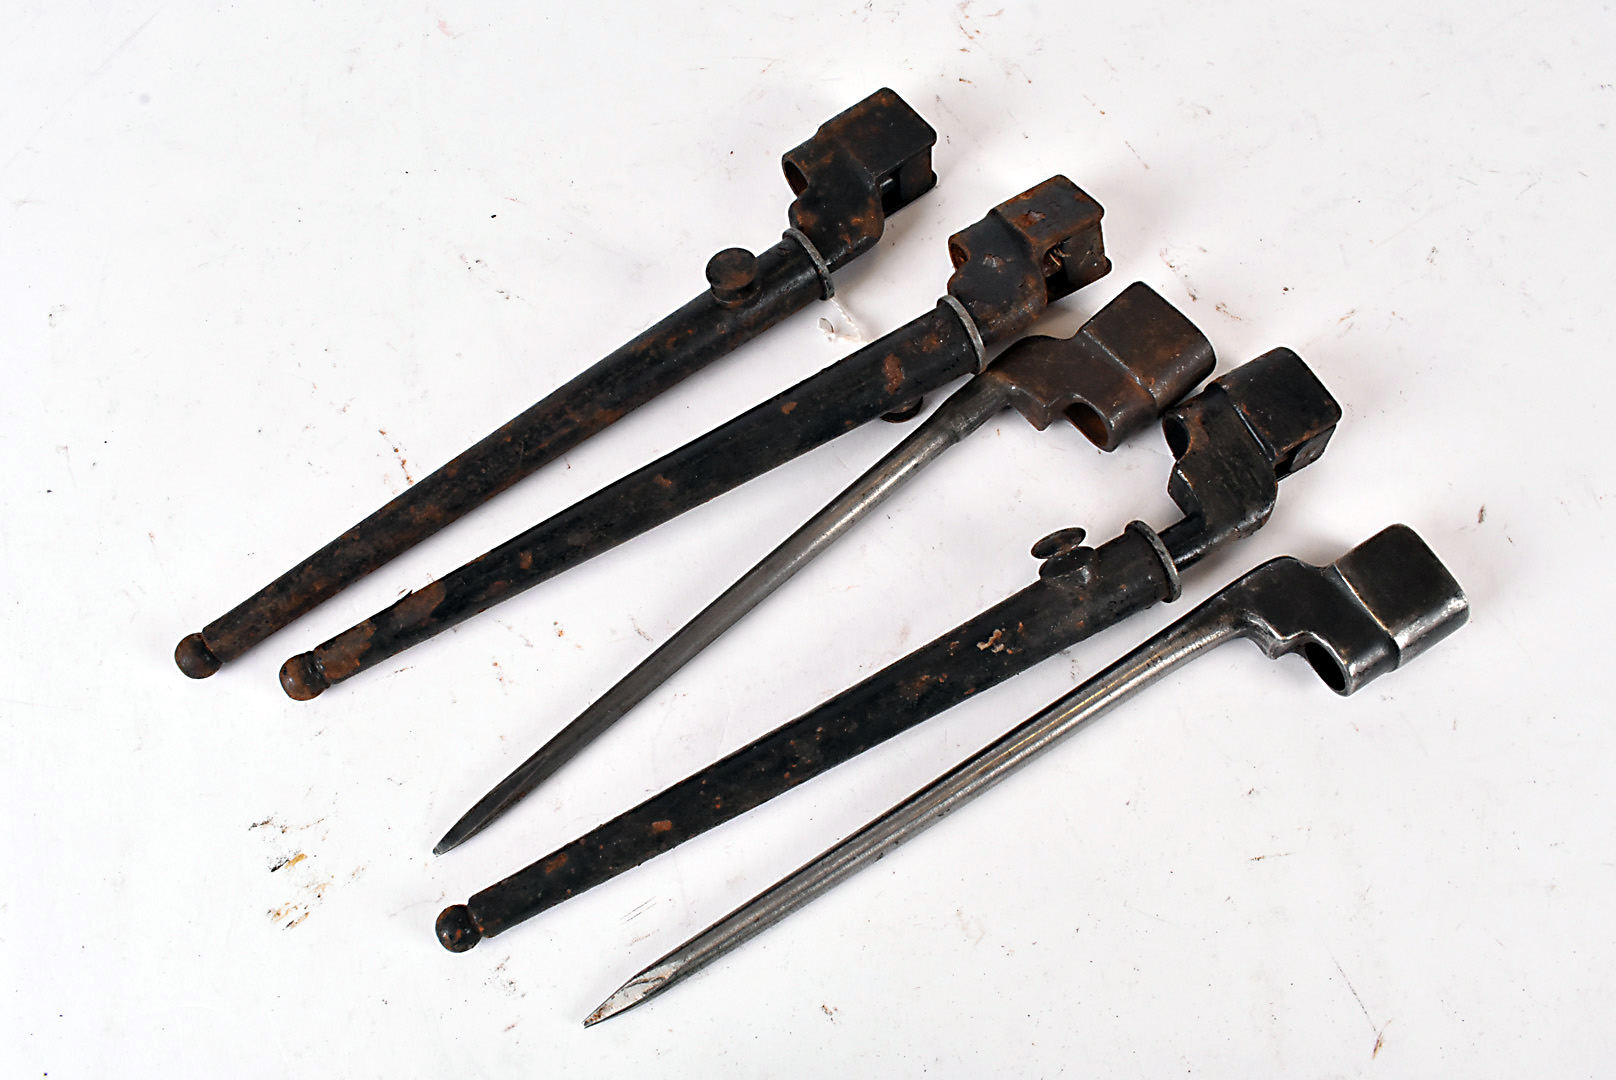 Five British No.4 spike bayonets, three having scabbards, two without (5)